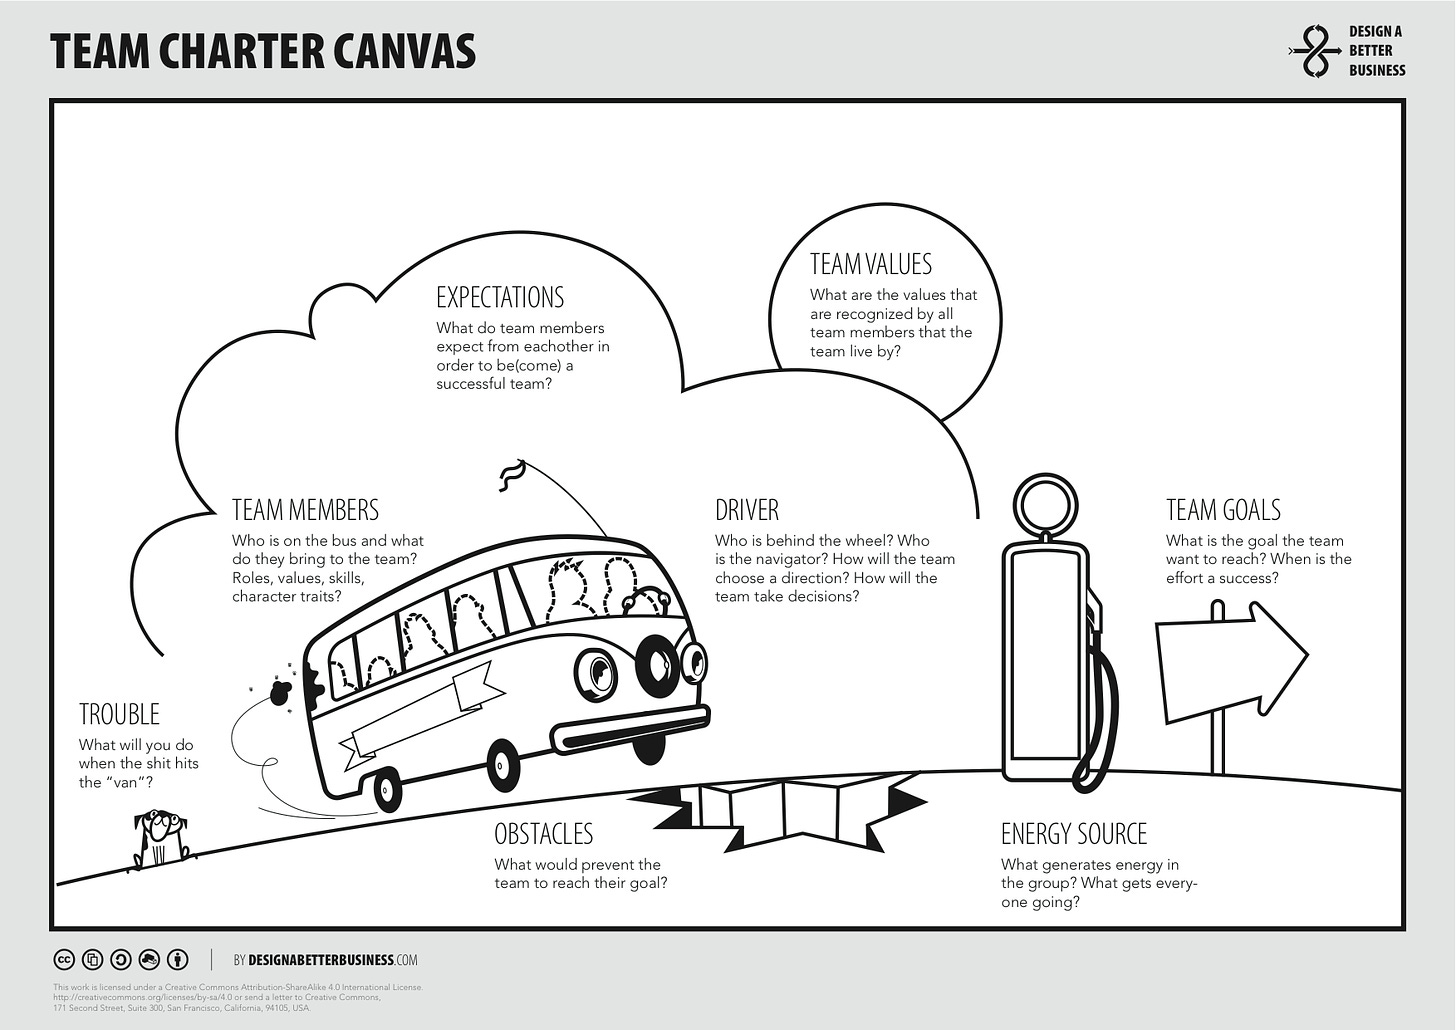 image of team charter canvas